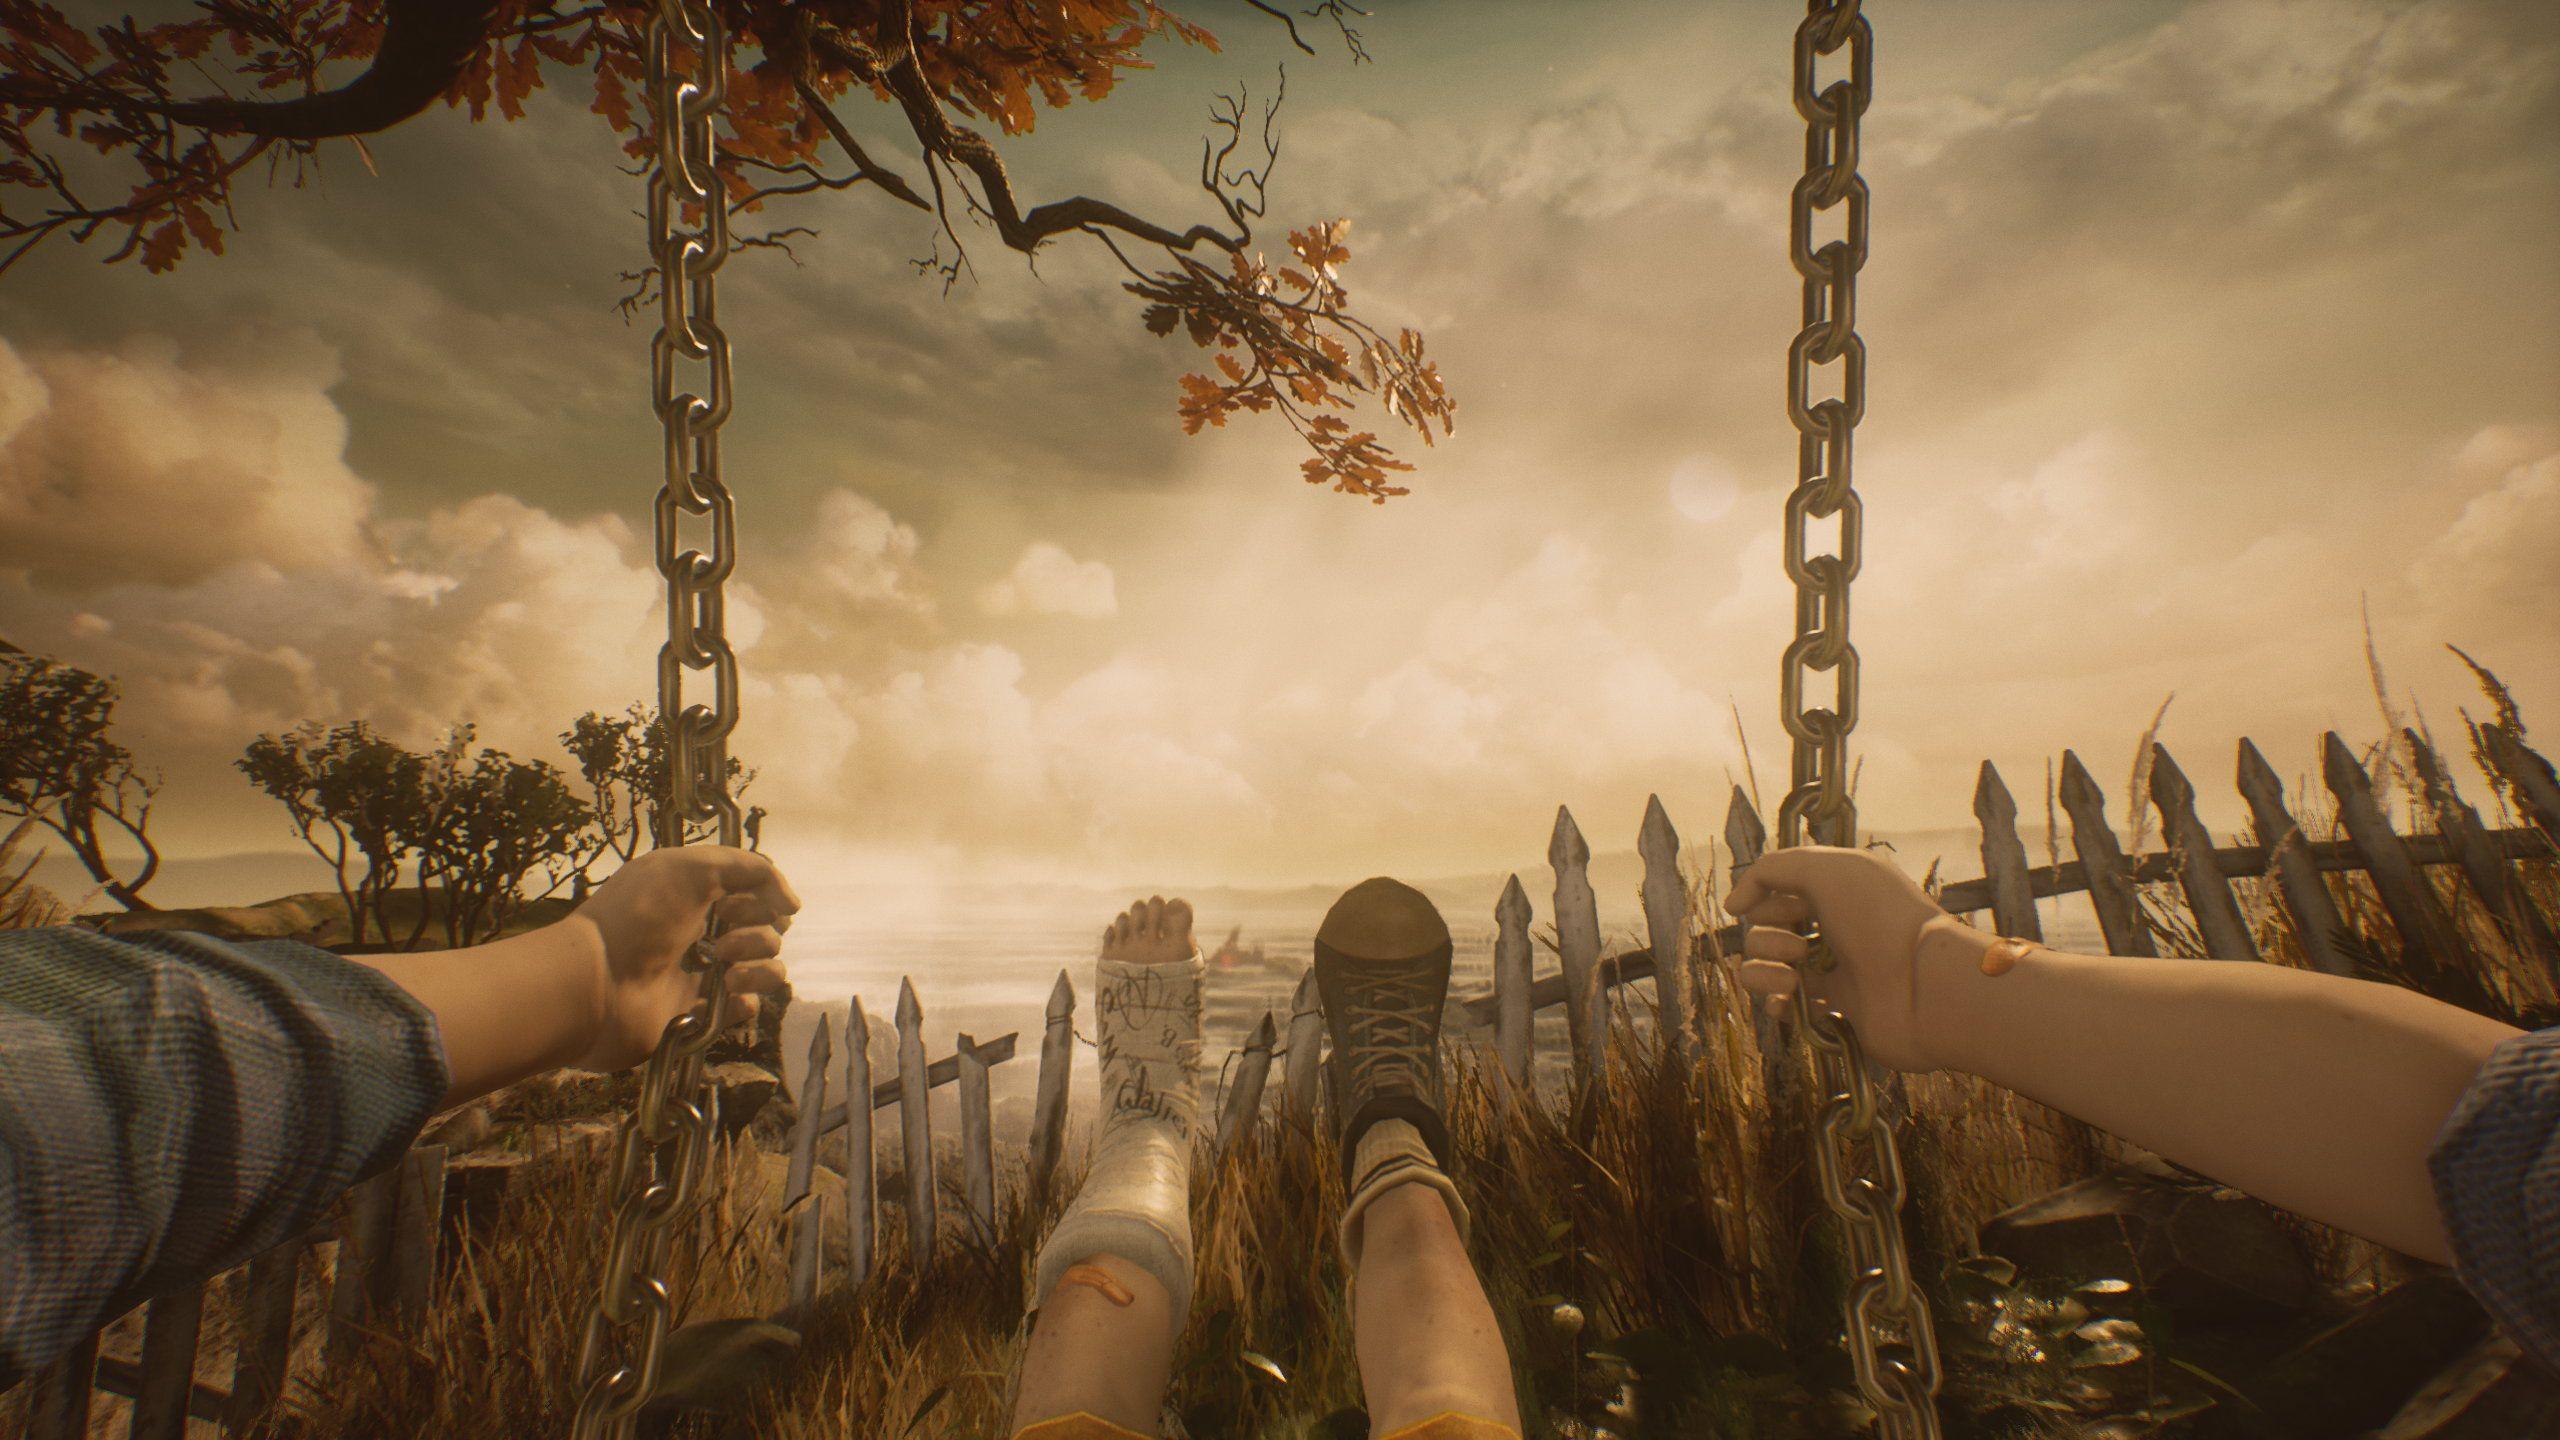 Image for Looks like What Remains of Edith Finch is coming to Xbox Series X/S and PlayStation 5